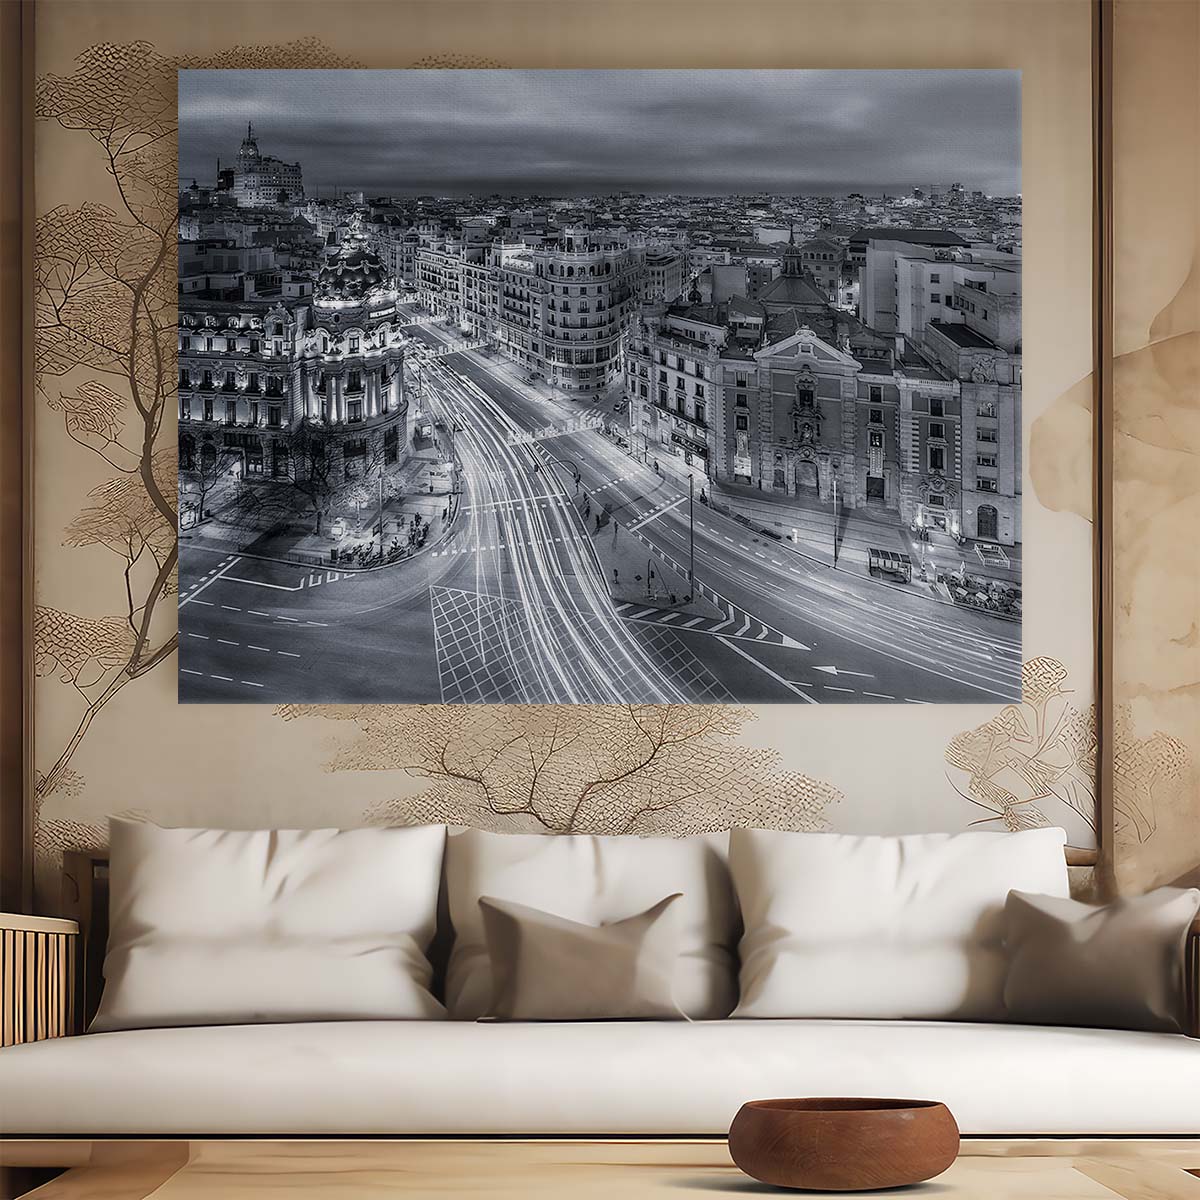 Madrid Nightscape Aerial Black & White Wall Art by Luxuriance Designs. Made in USA.